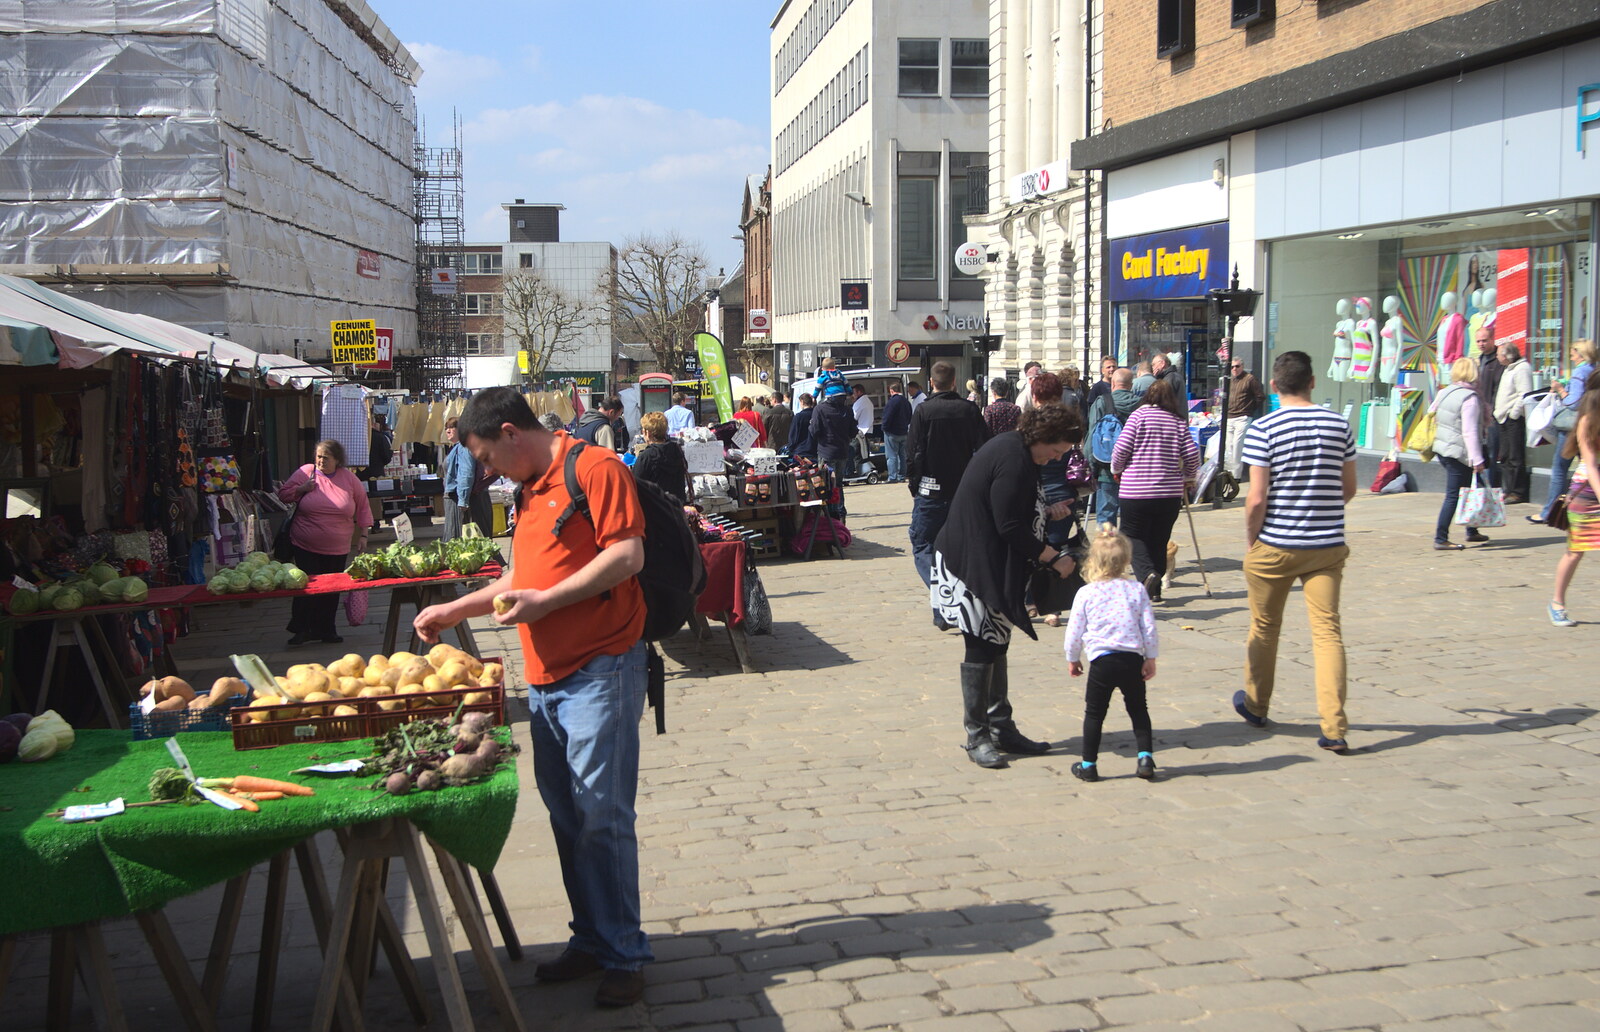 More Chesterfield markets from Chesterfield and the Twisty Spire, Derbyshire - 19th April 2013